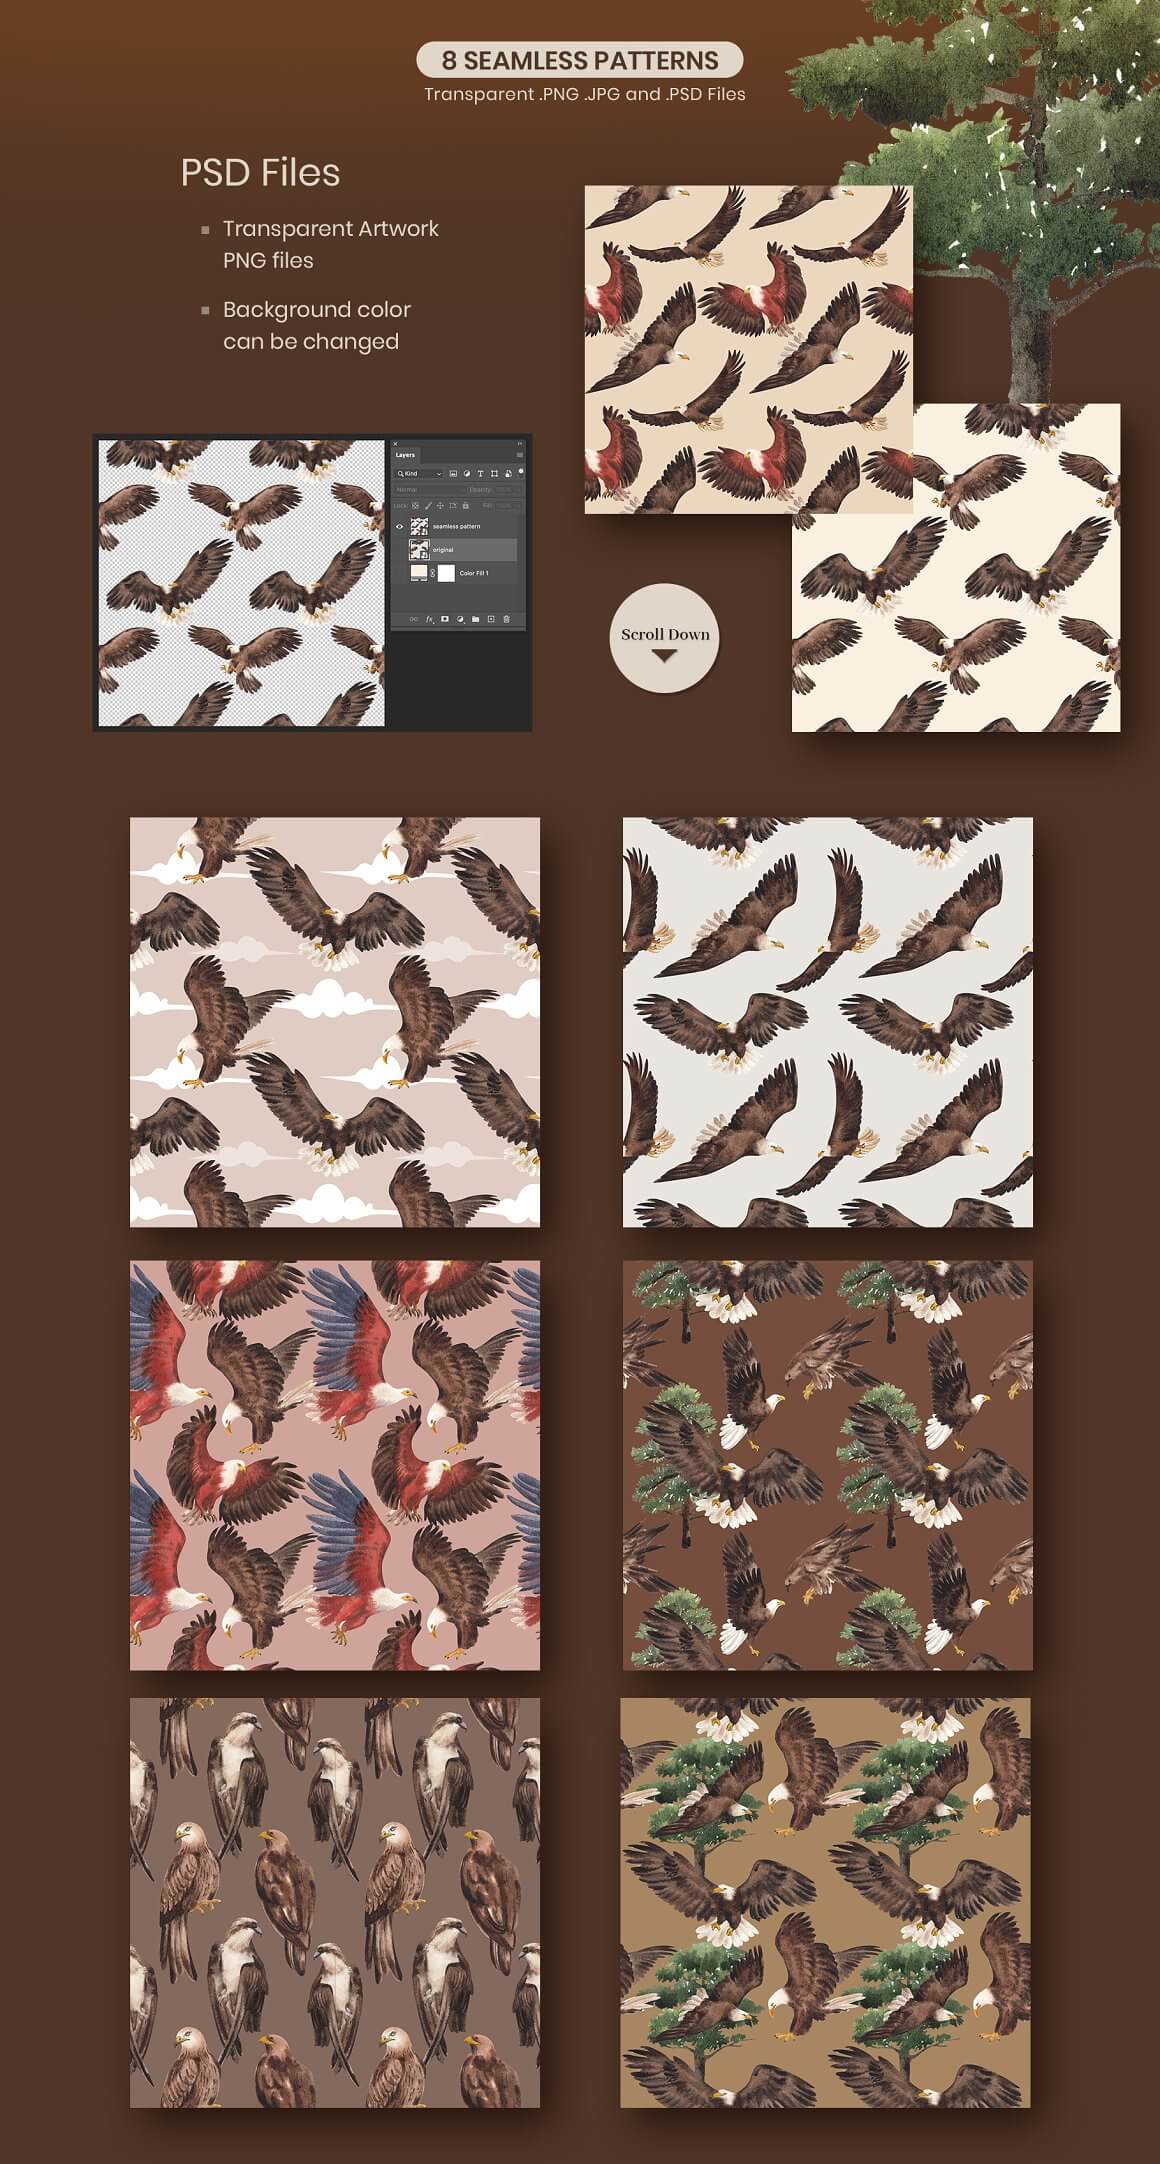 8 seamless patterns with transparent artwork PNG files.